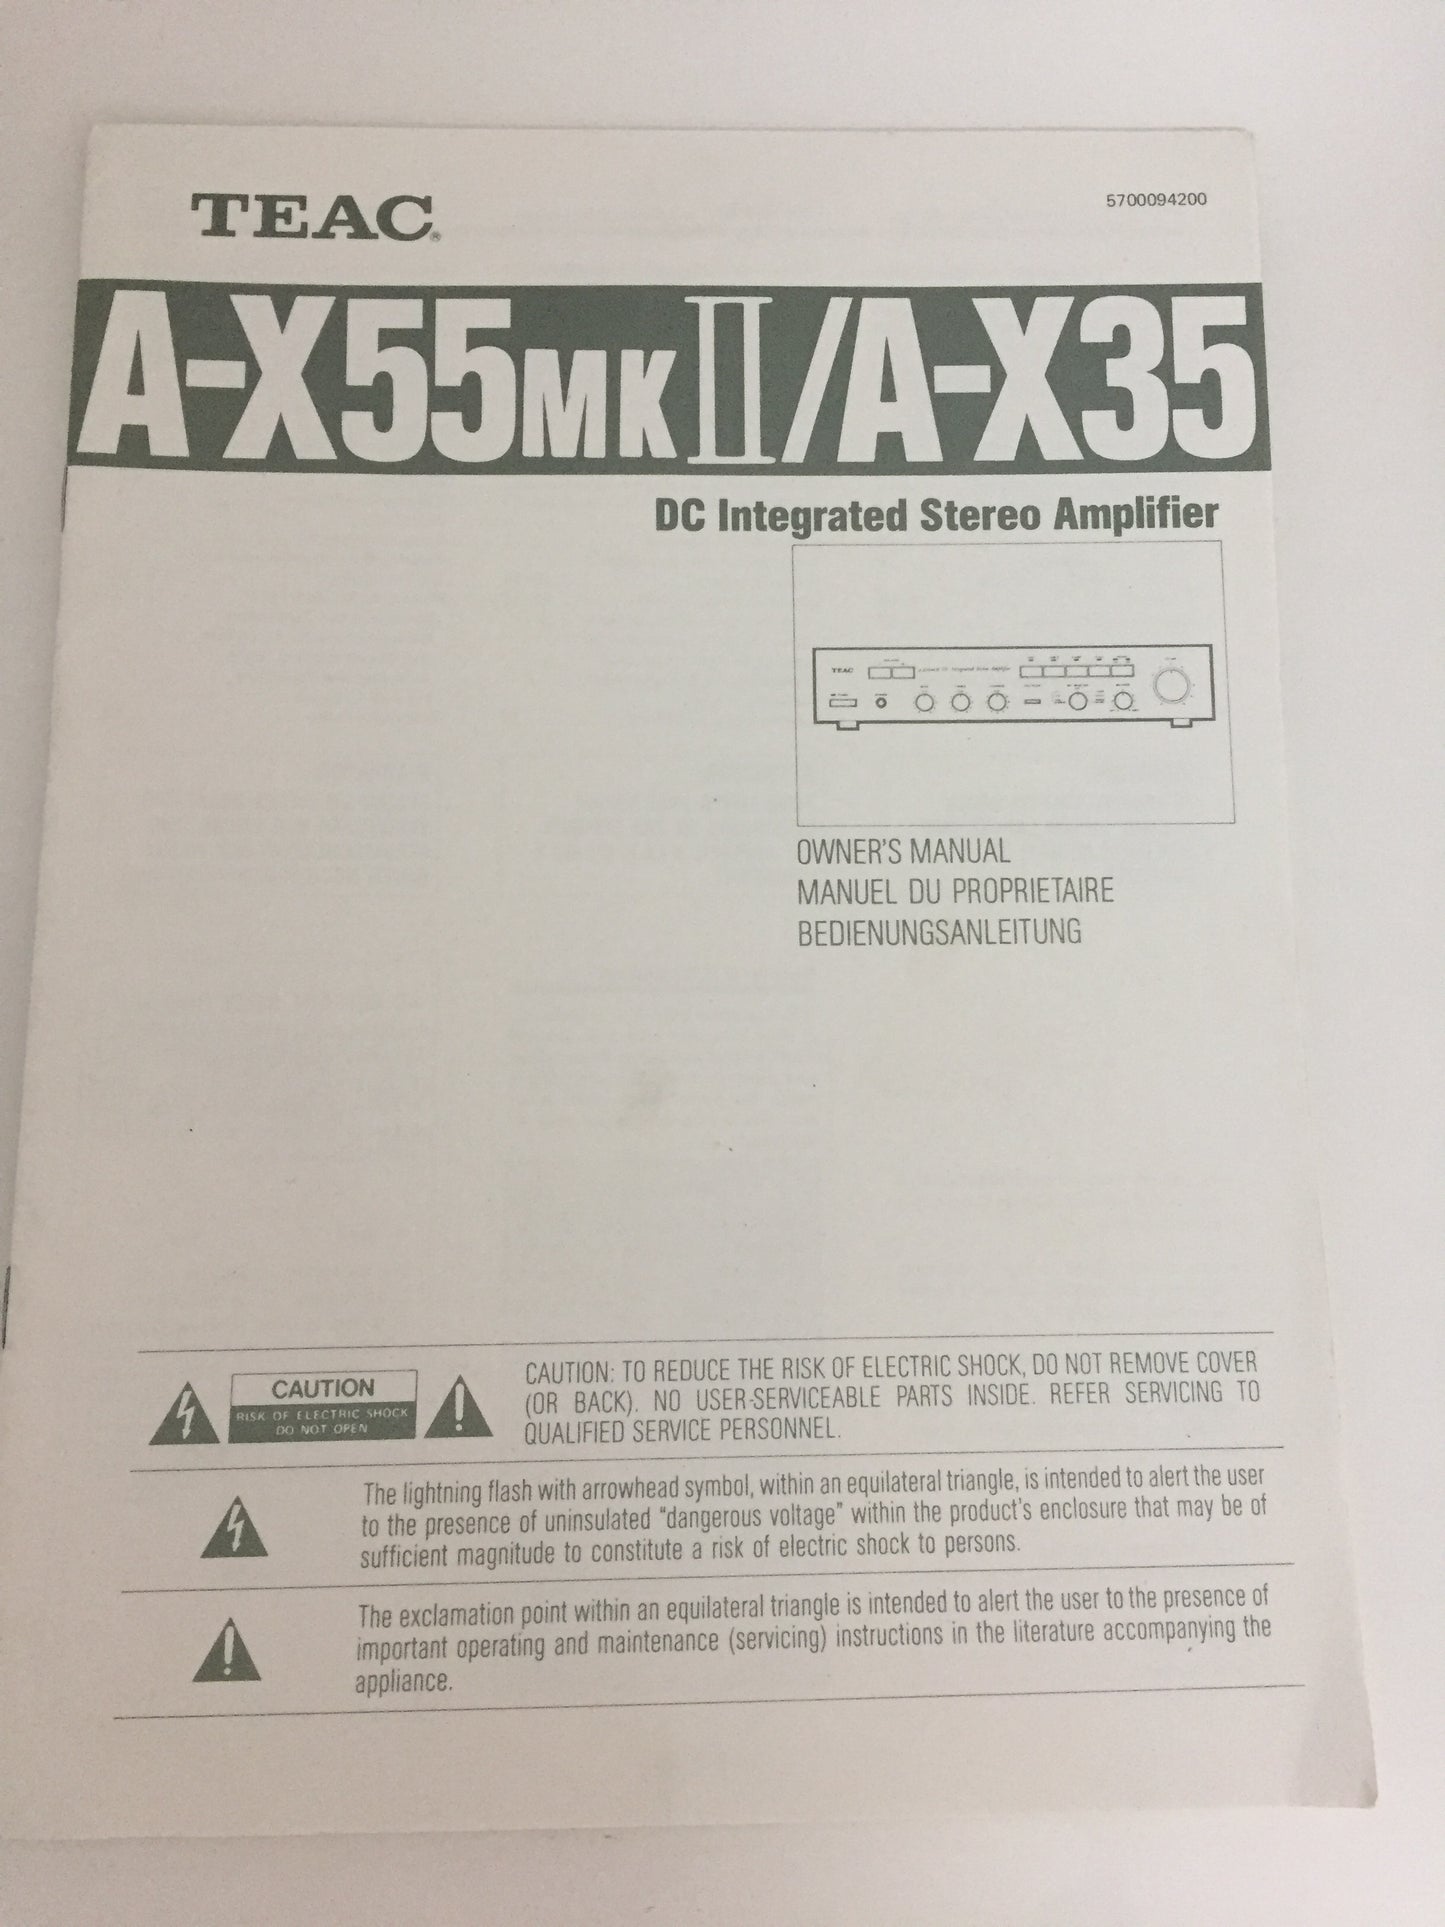 Teac A-X55 mk2/A-X35 DC Integrated Stereo Amplifier Owner's Manual